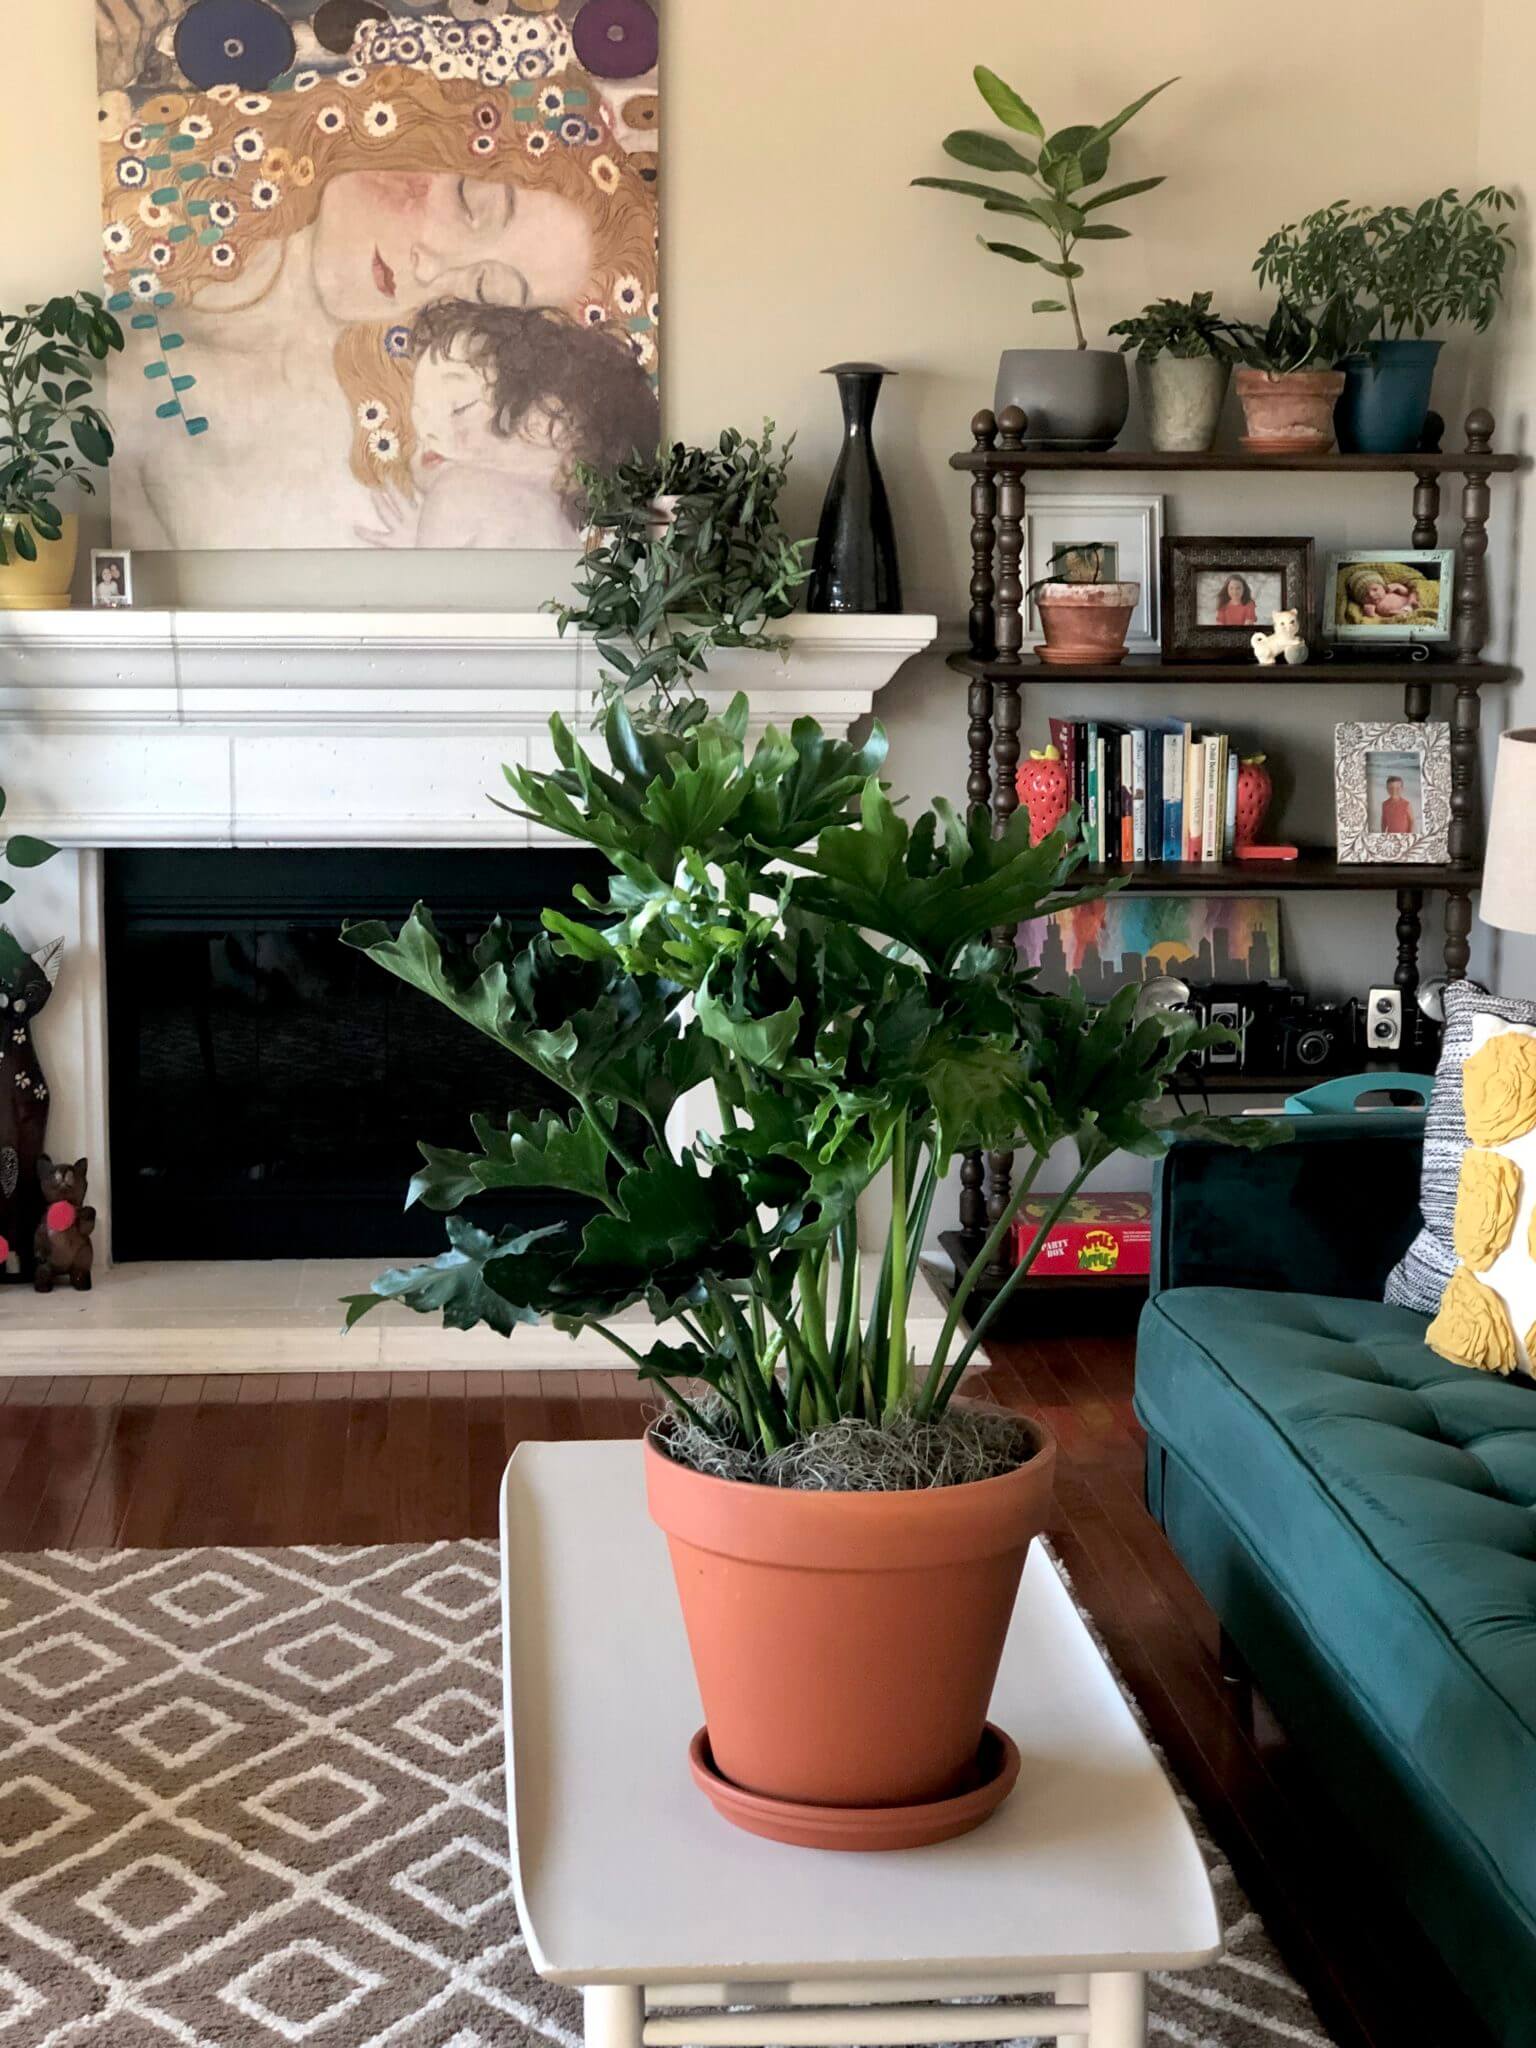 A Single Mom Shares How Plants are Part of Her Self Care